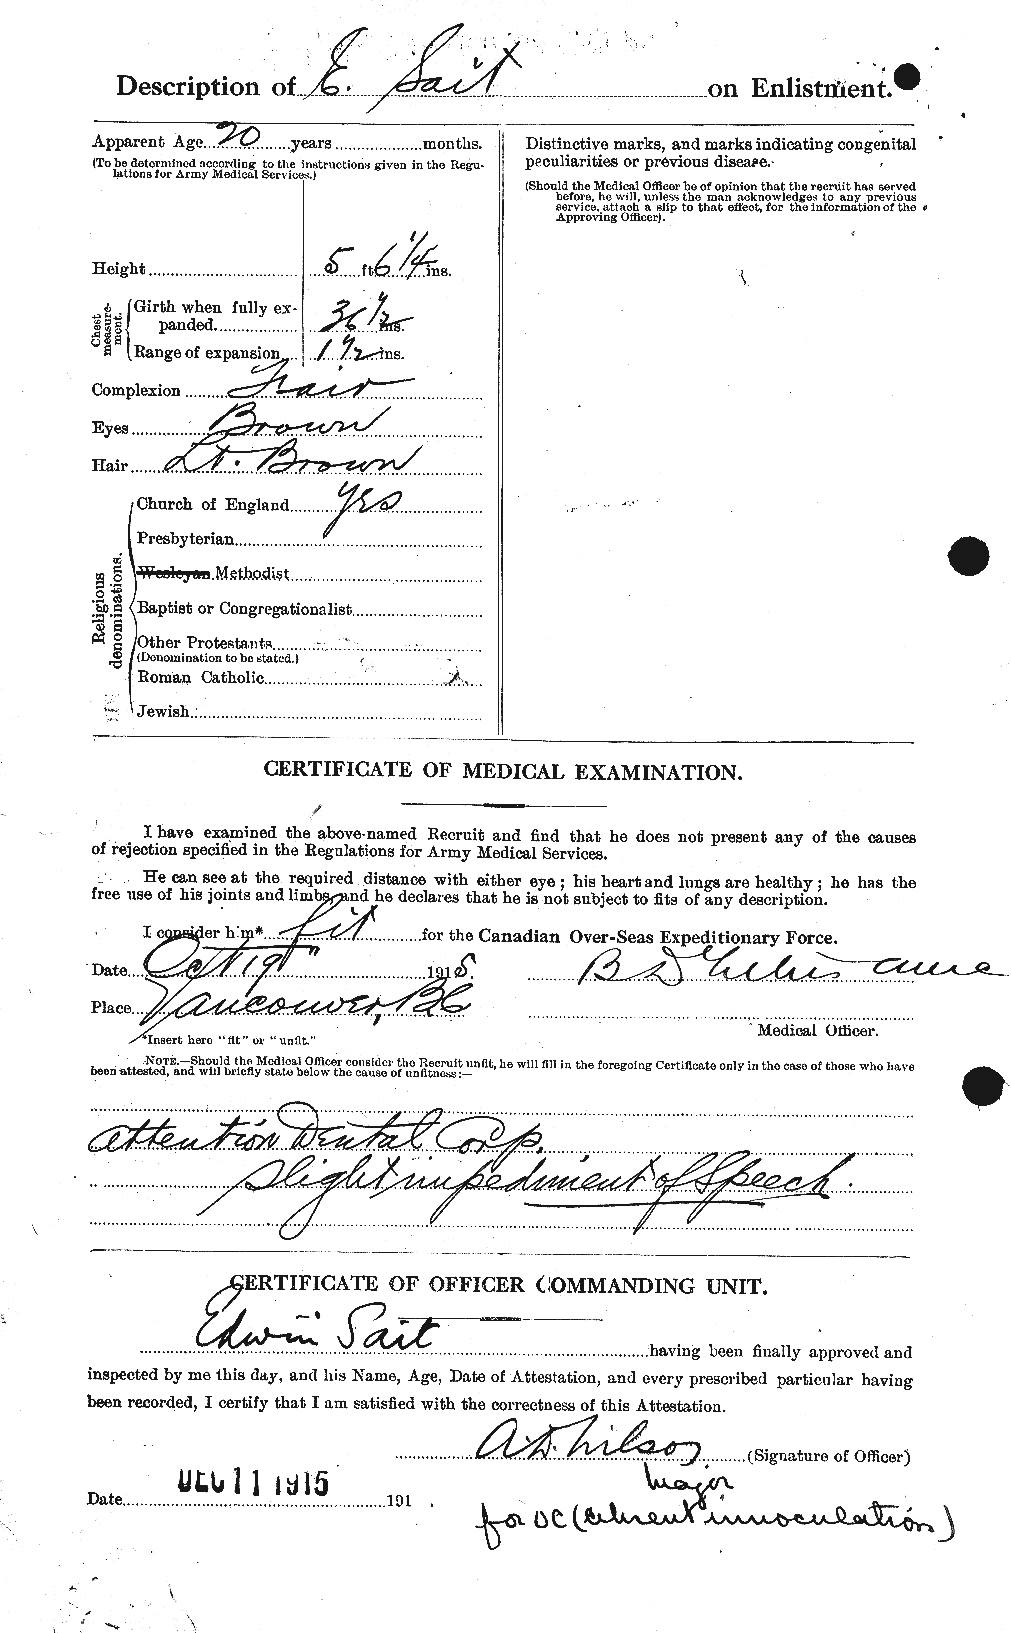 Personnel Records of the First World War - CEF 077227b